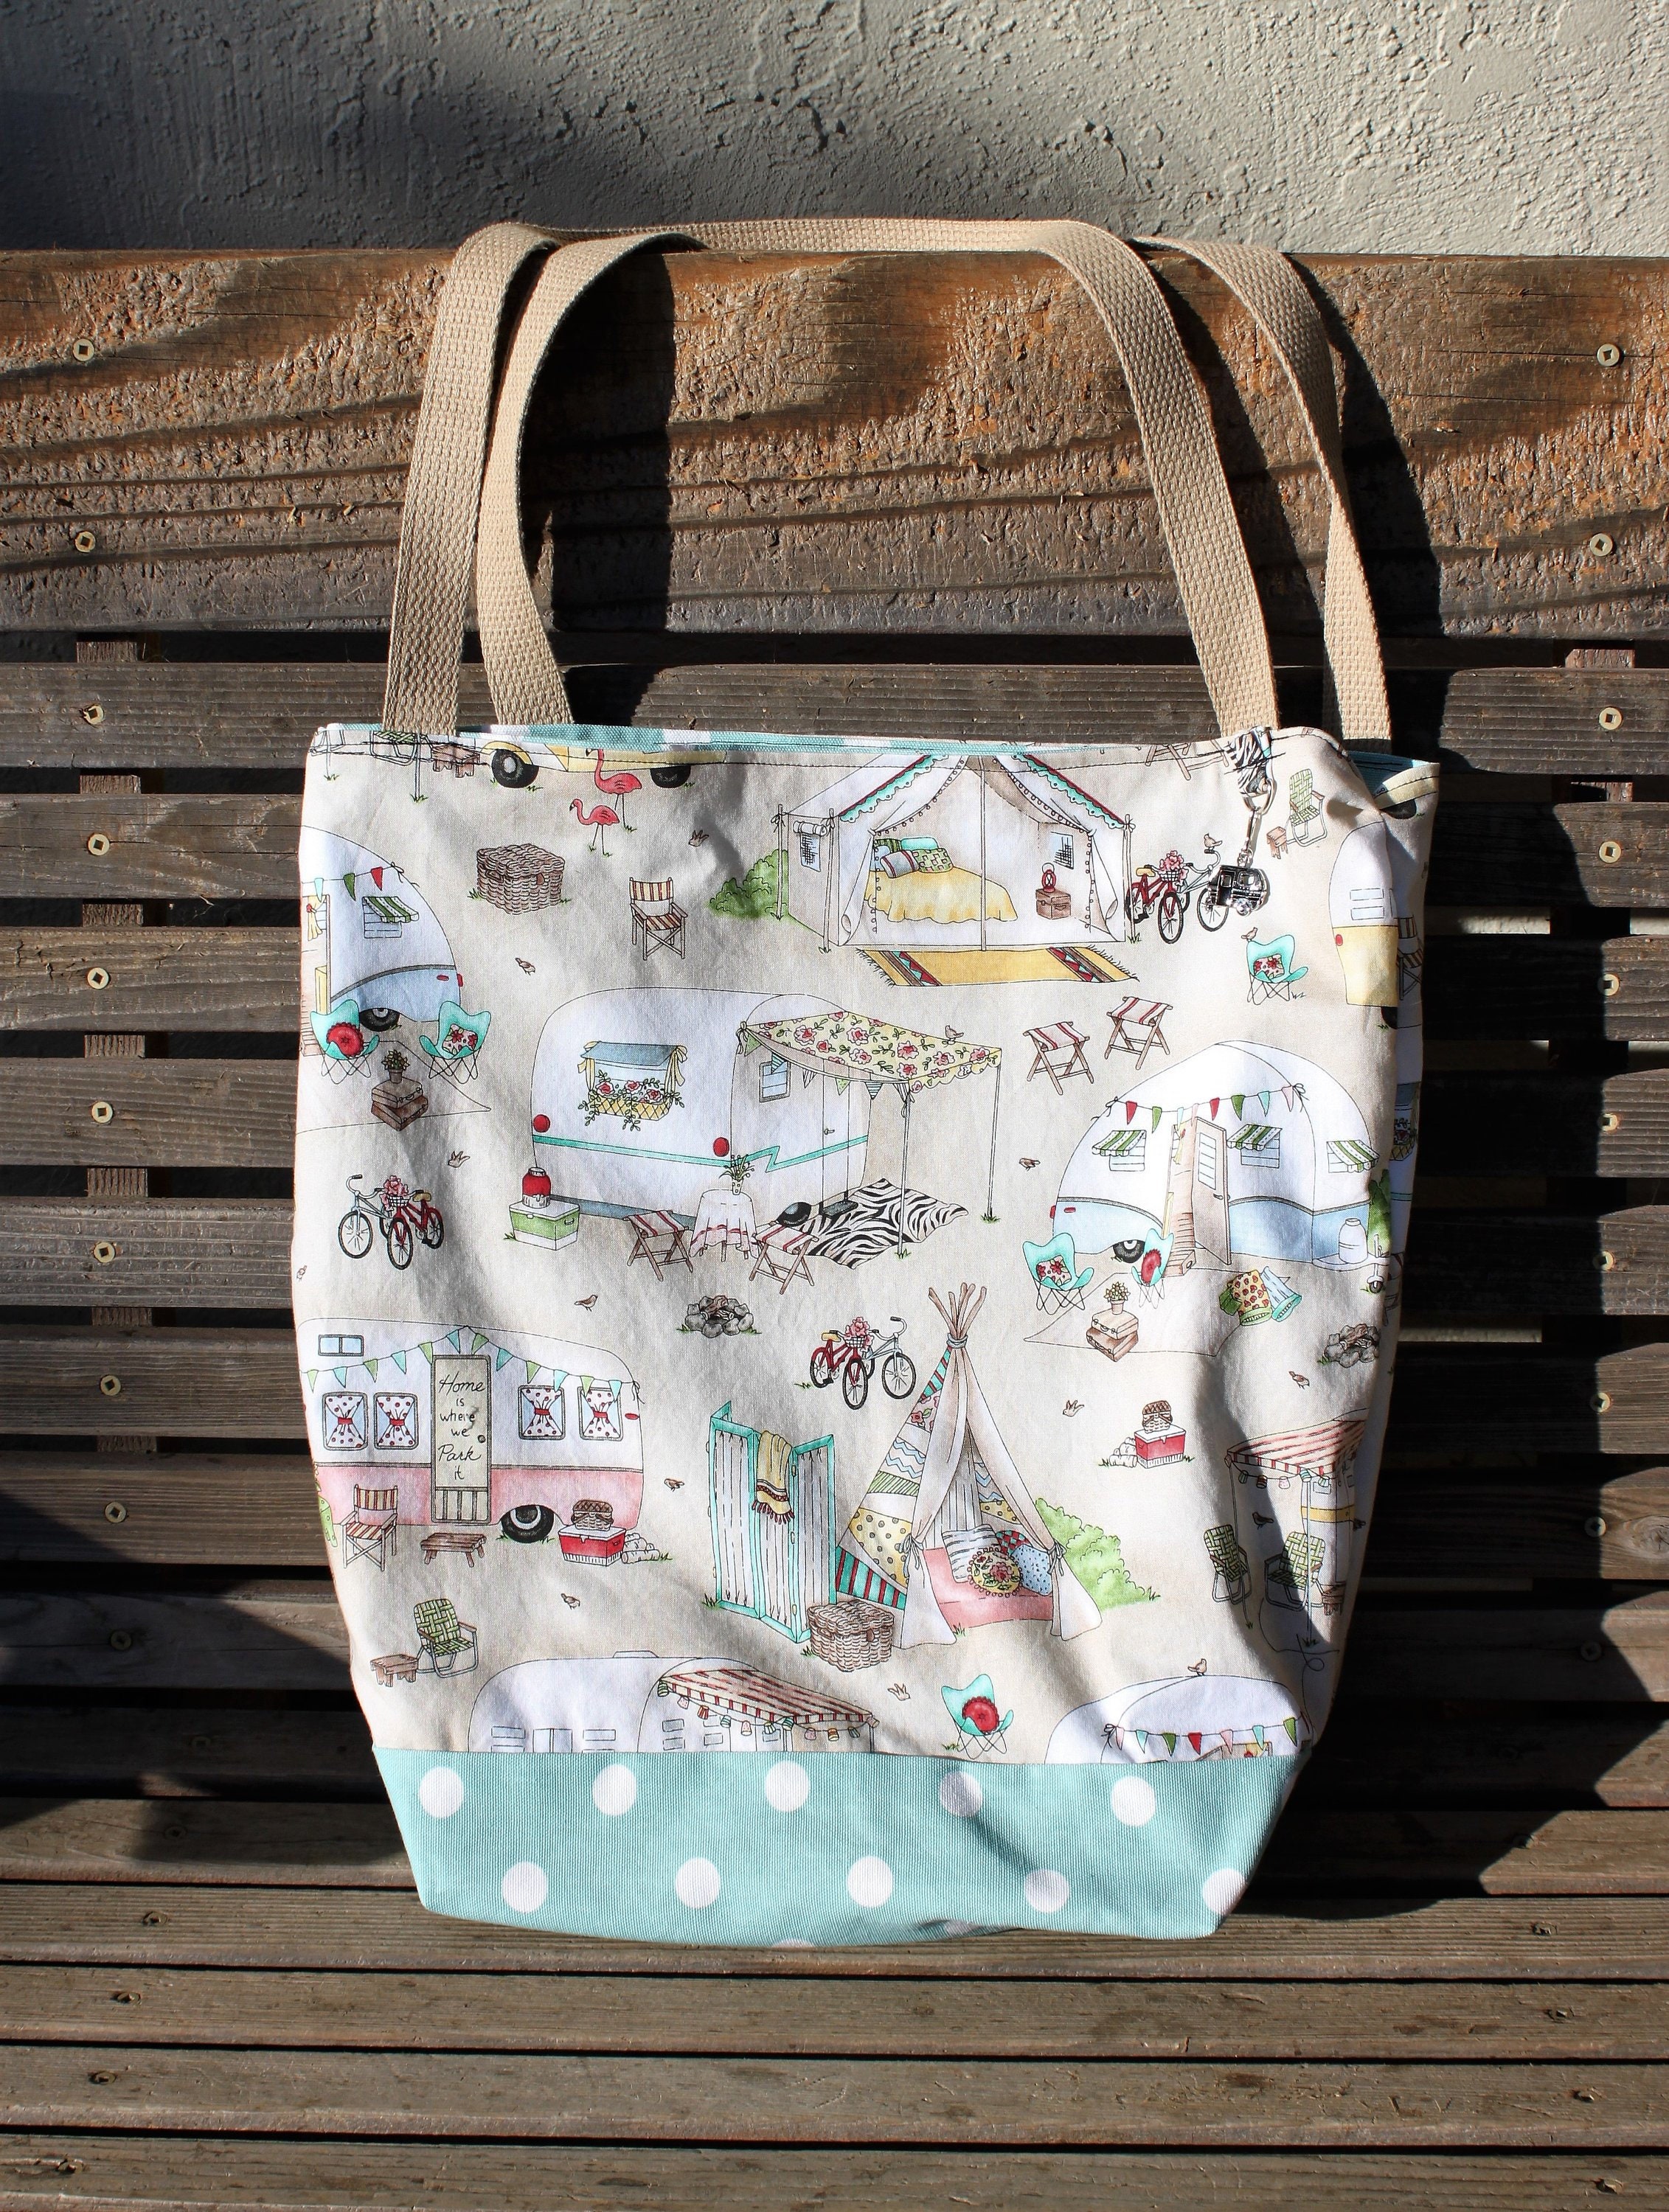 Retro camping camper tote bag, shopping bag. Great for groceries ...